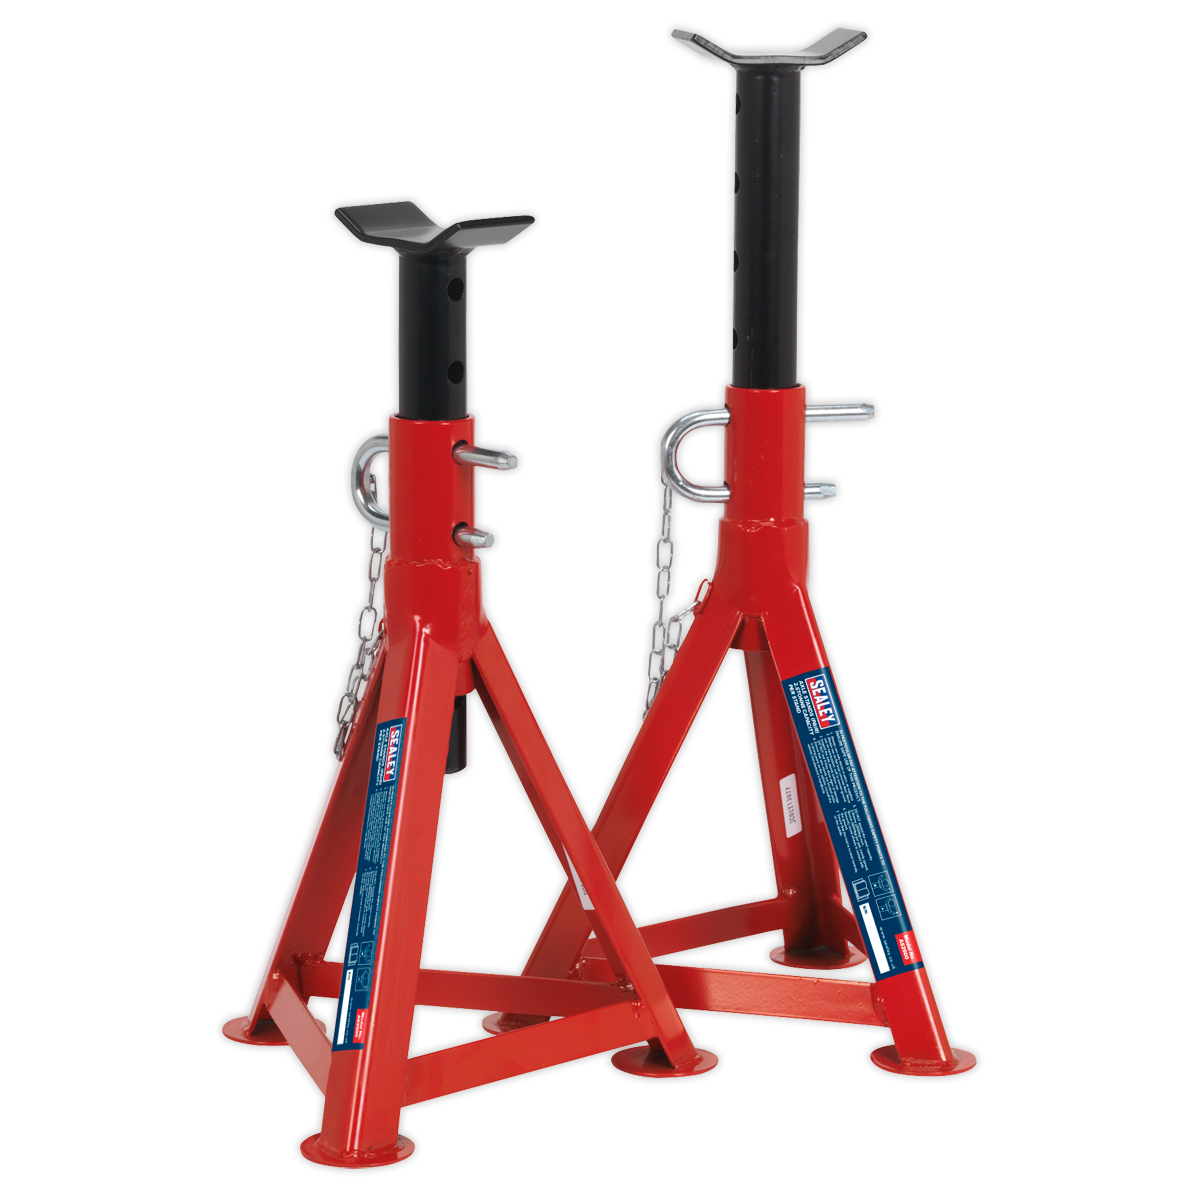 SEALEY - AS2500 Axle Stands (Pair) 2.5tonne Capacity per Stand